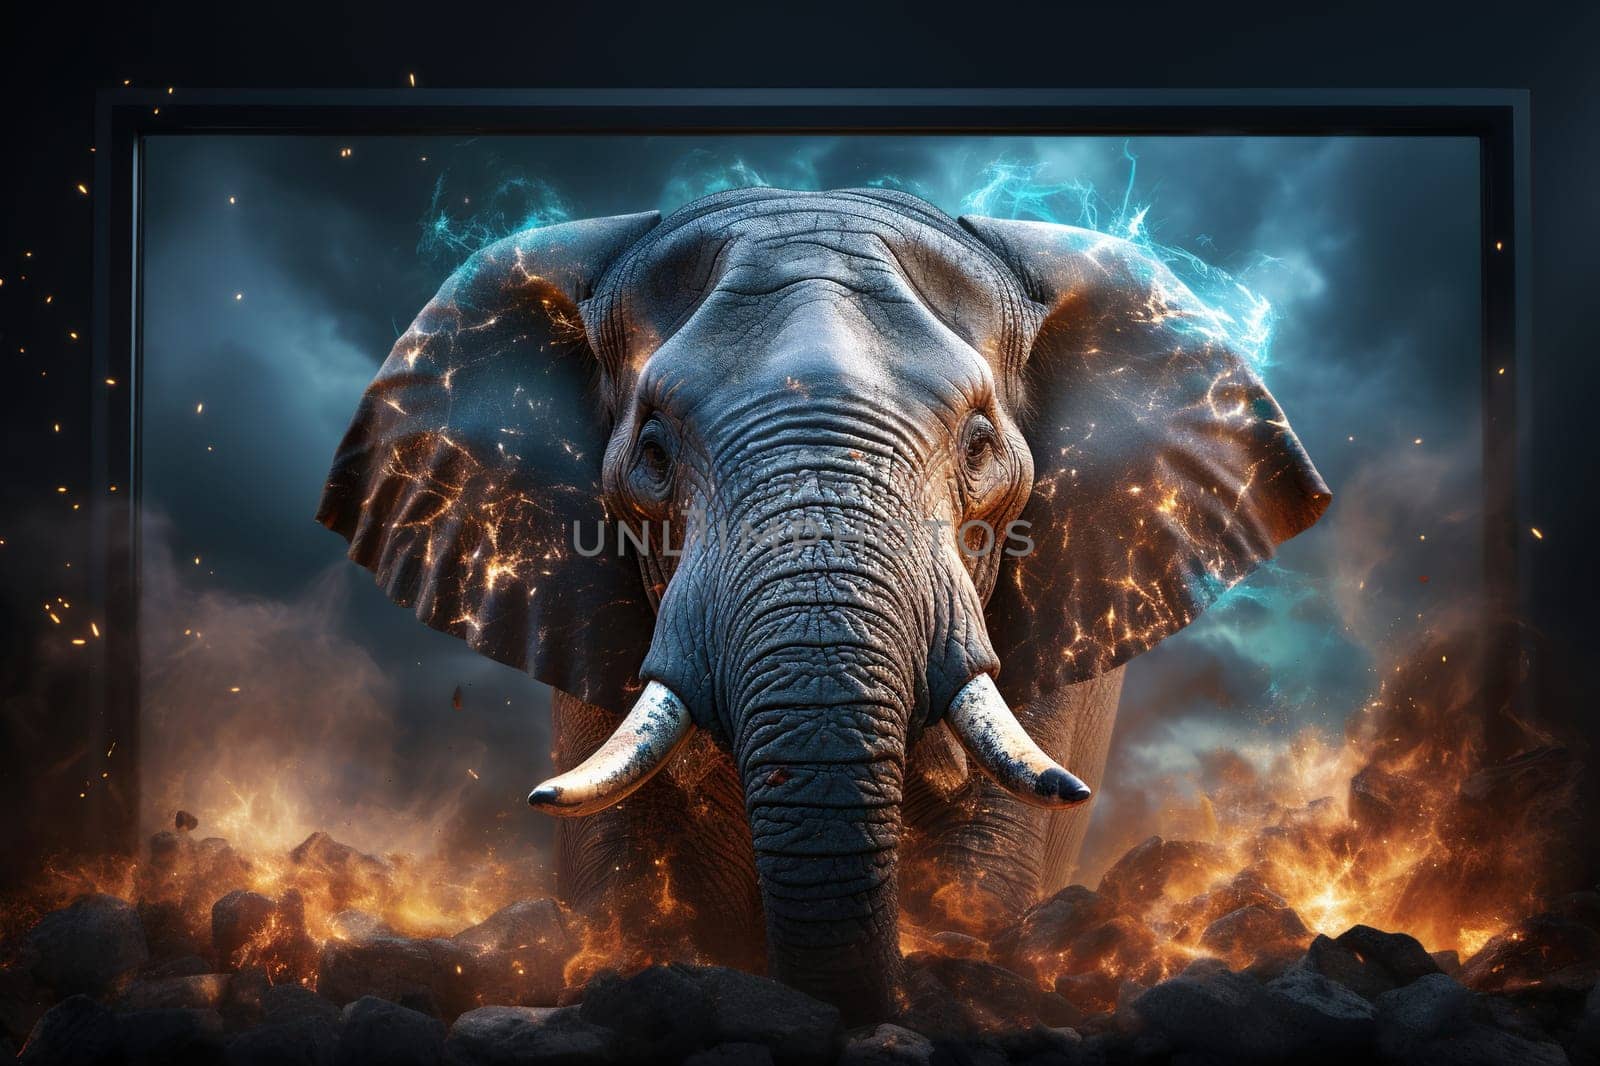 An elephant emerges from the screen of a modern TV. Generated by artificial intelligence by Vovmar